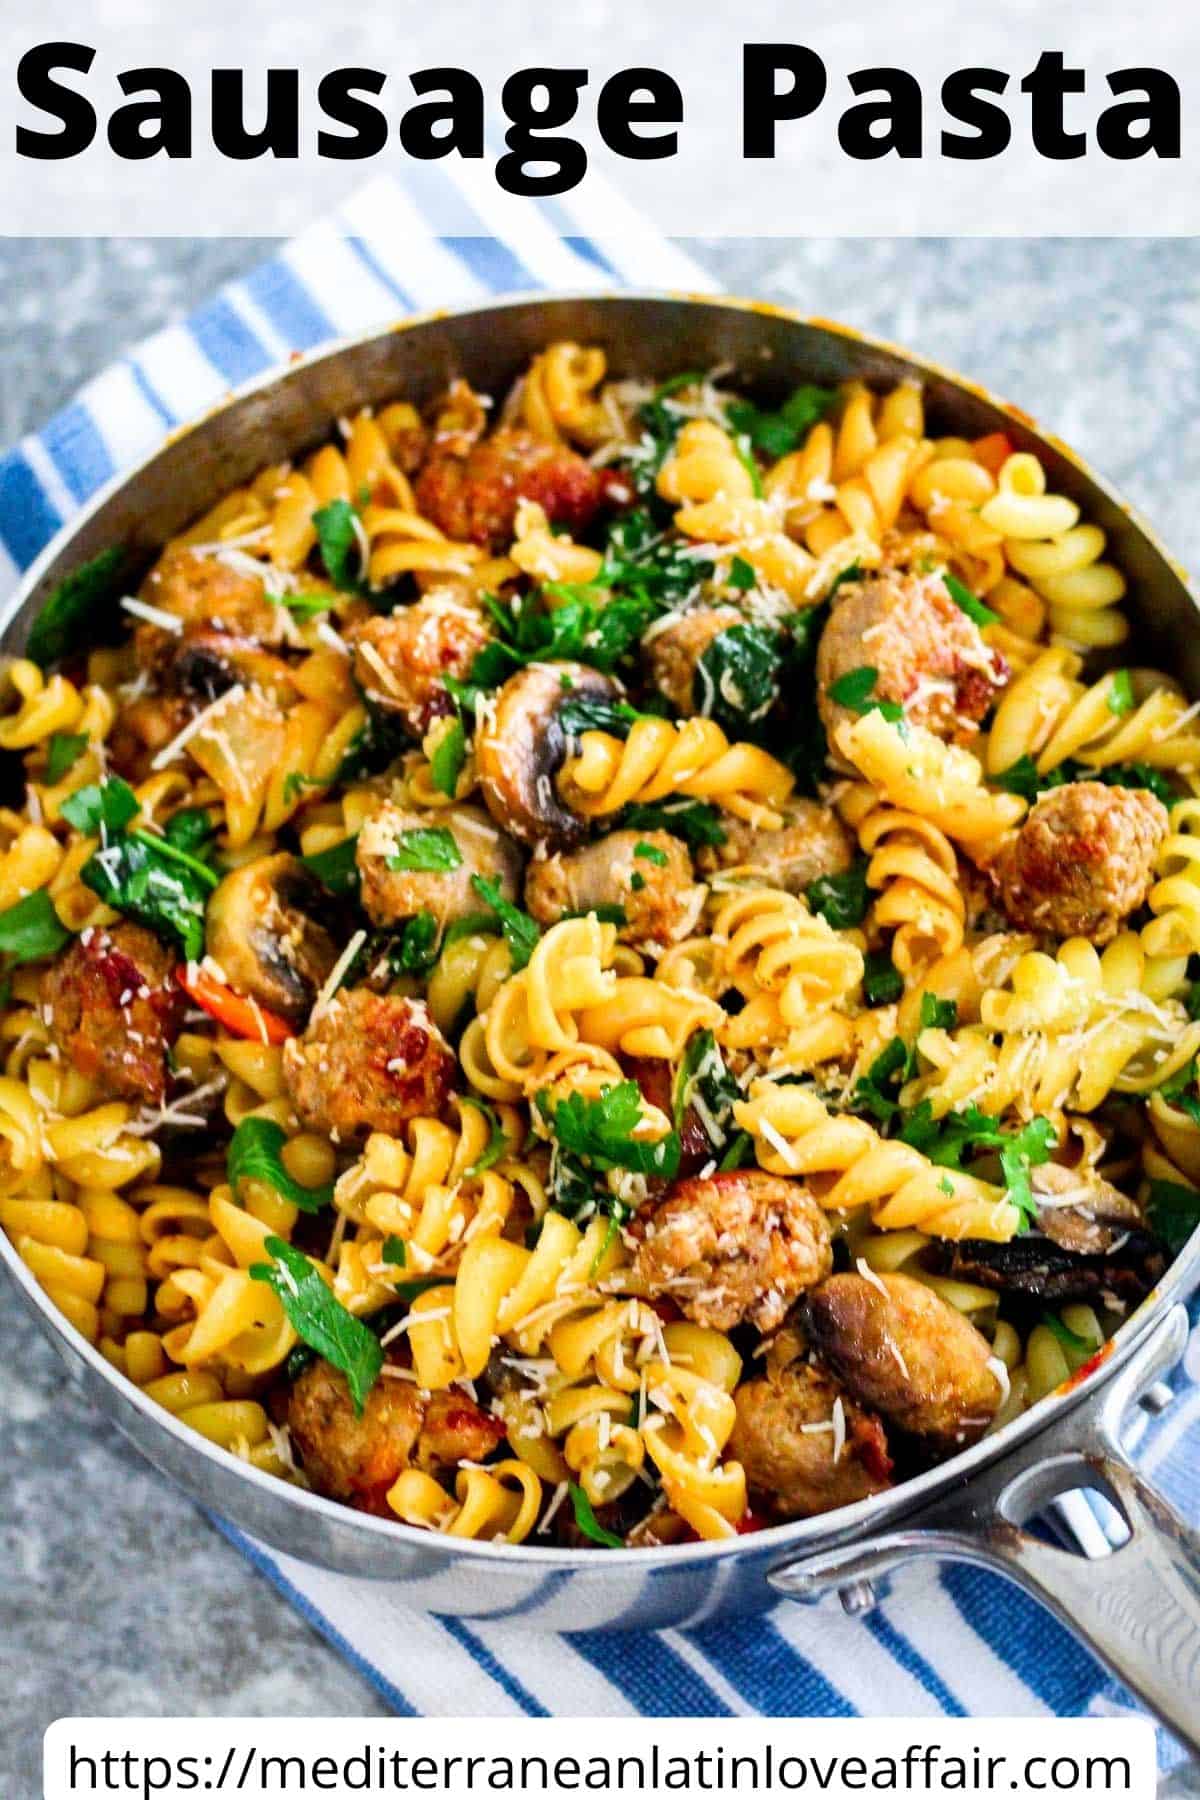 Sausage pasta image made into a poster or pin for Pinterest specifically. There's a title bar over the image and a website link at the bottom.